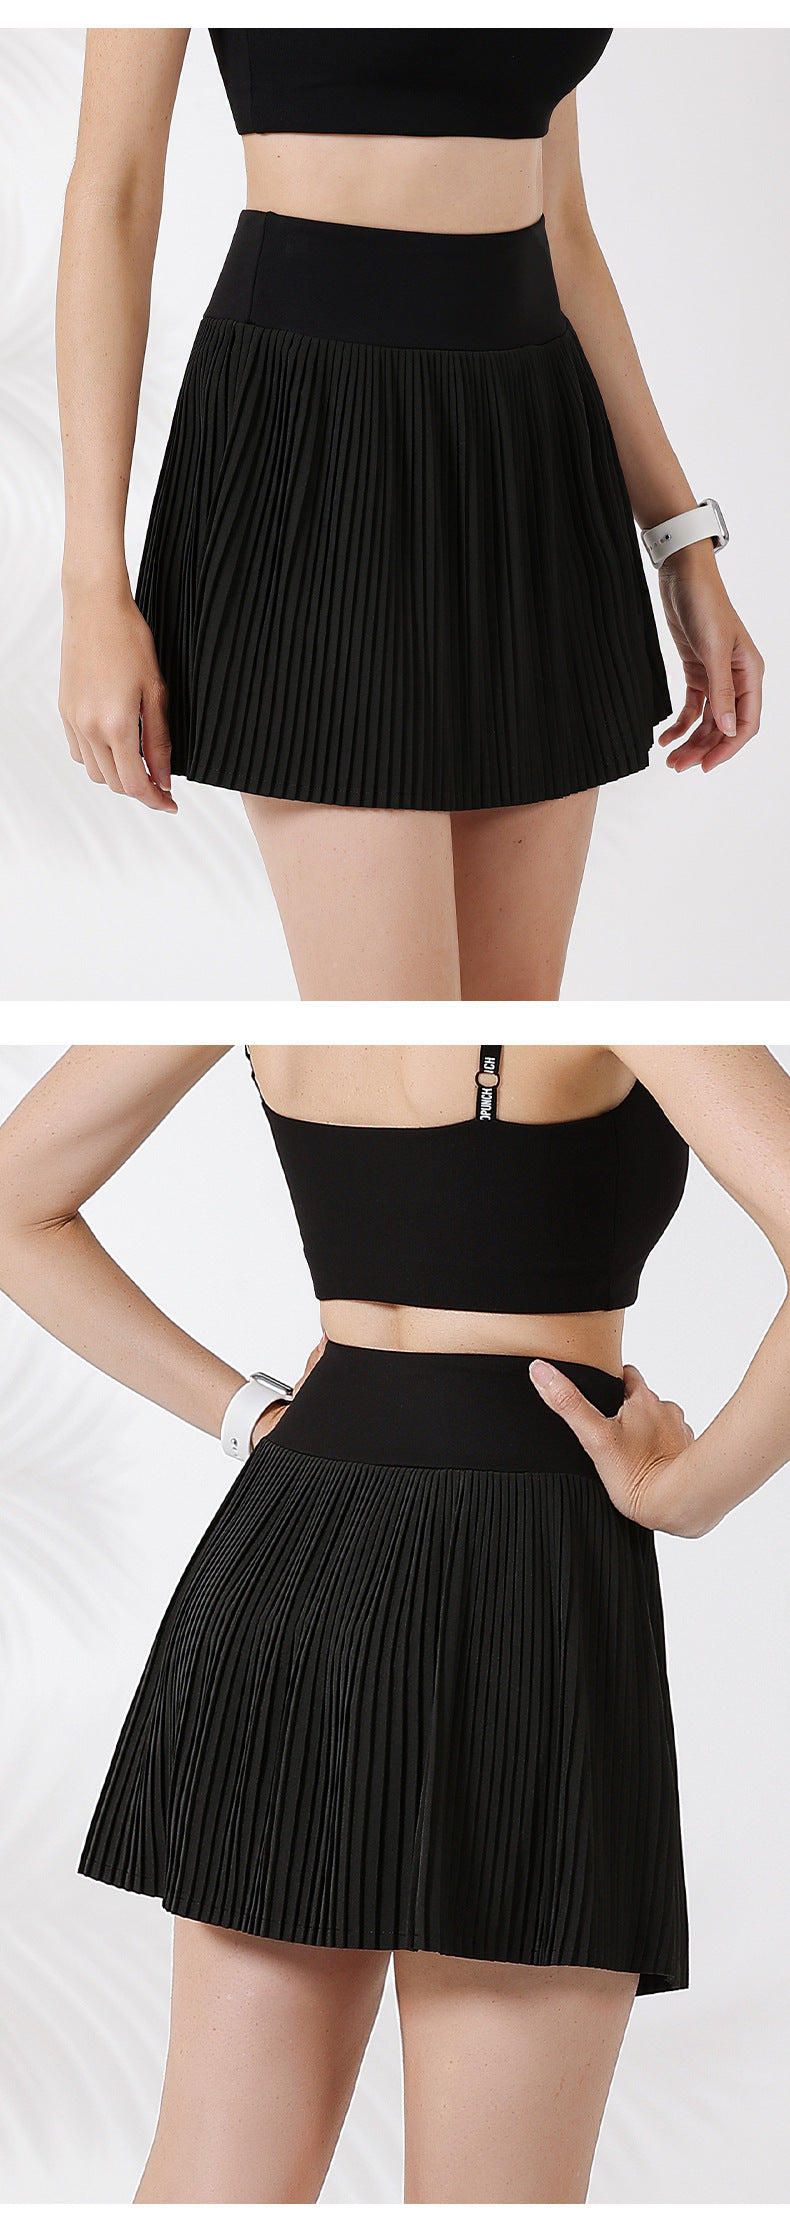 Summer new 3D pressing pleated fitness pants female built-in pocket sports running training quick-drying yoga skirt